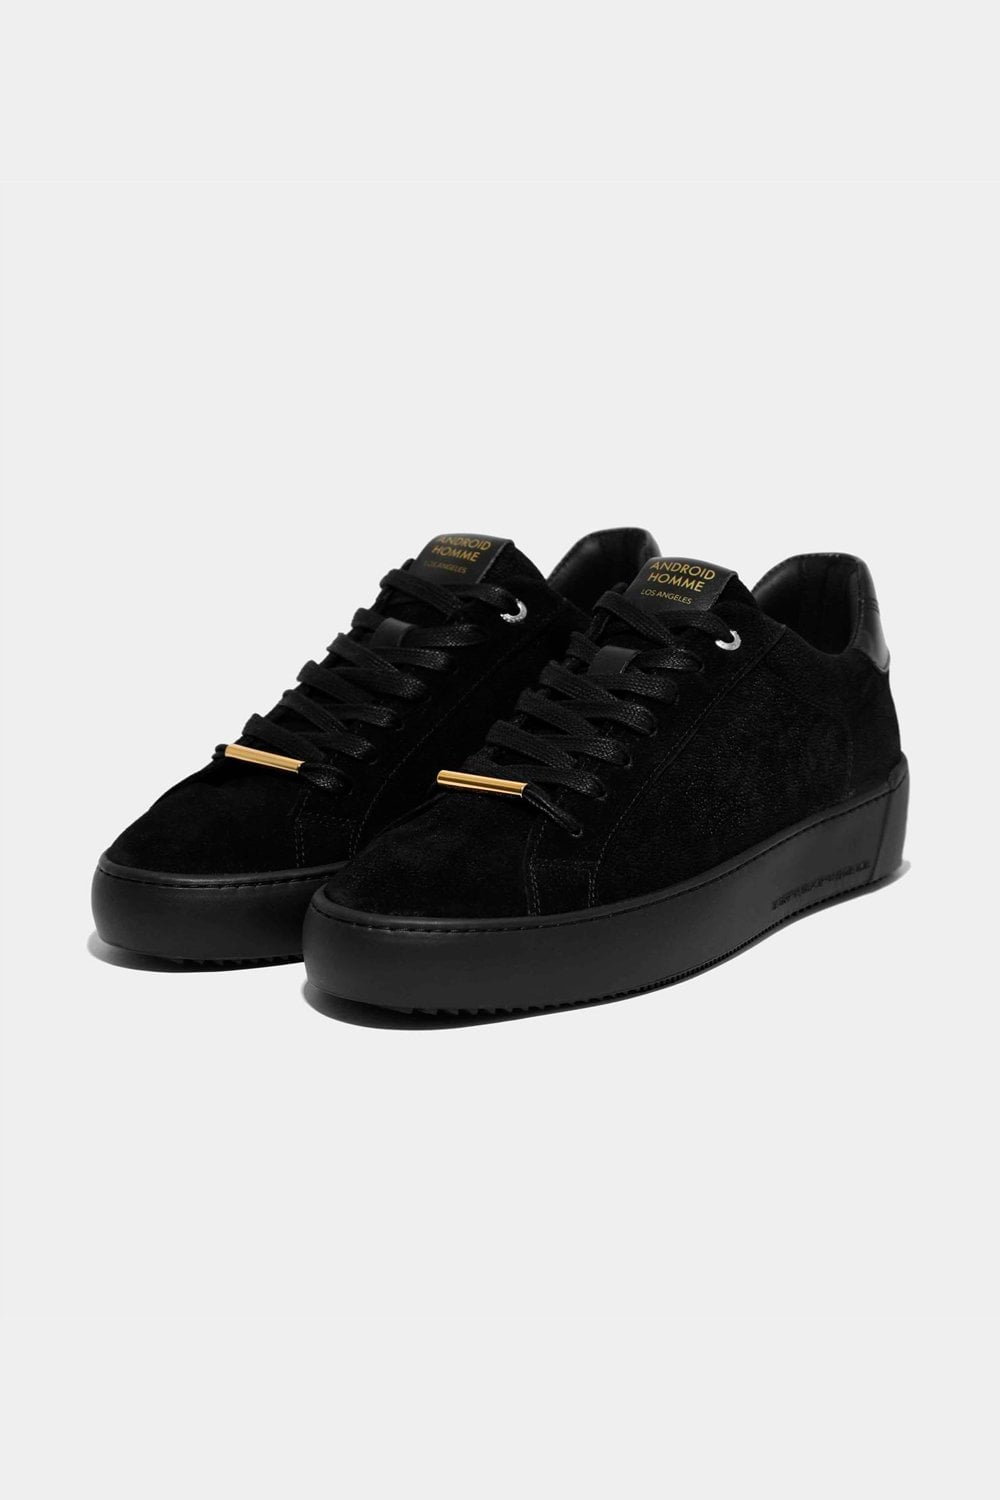 Buy the Android Homme Zuma Sneakers in Black/Black at Intro. Spend £50 for free UK delivery. Official stockists. We ship worldwide.